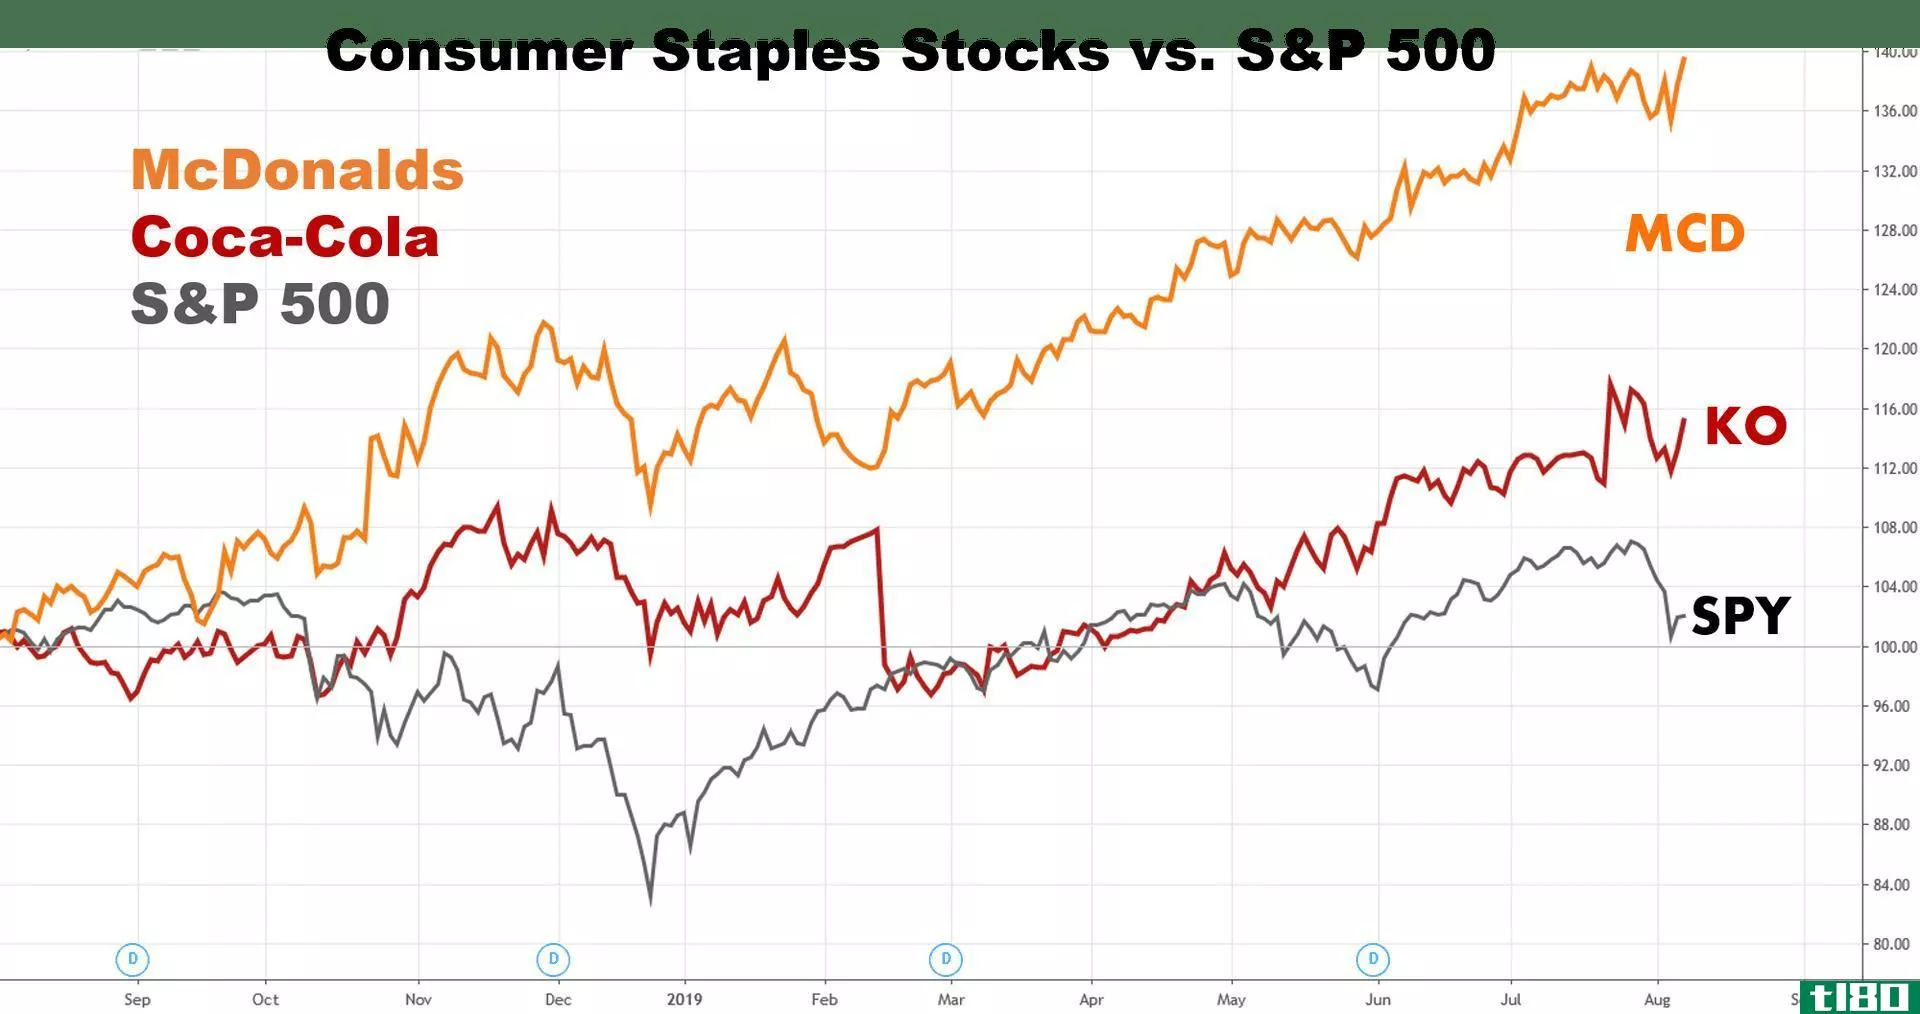 Chart showing the performance of c***umer staples stock vs. the S&P 500